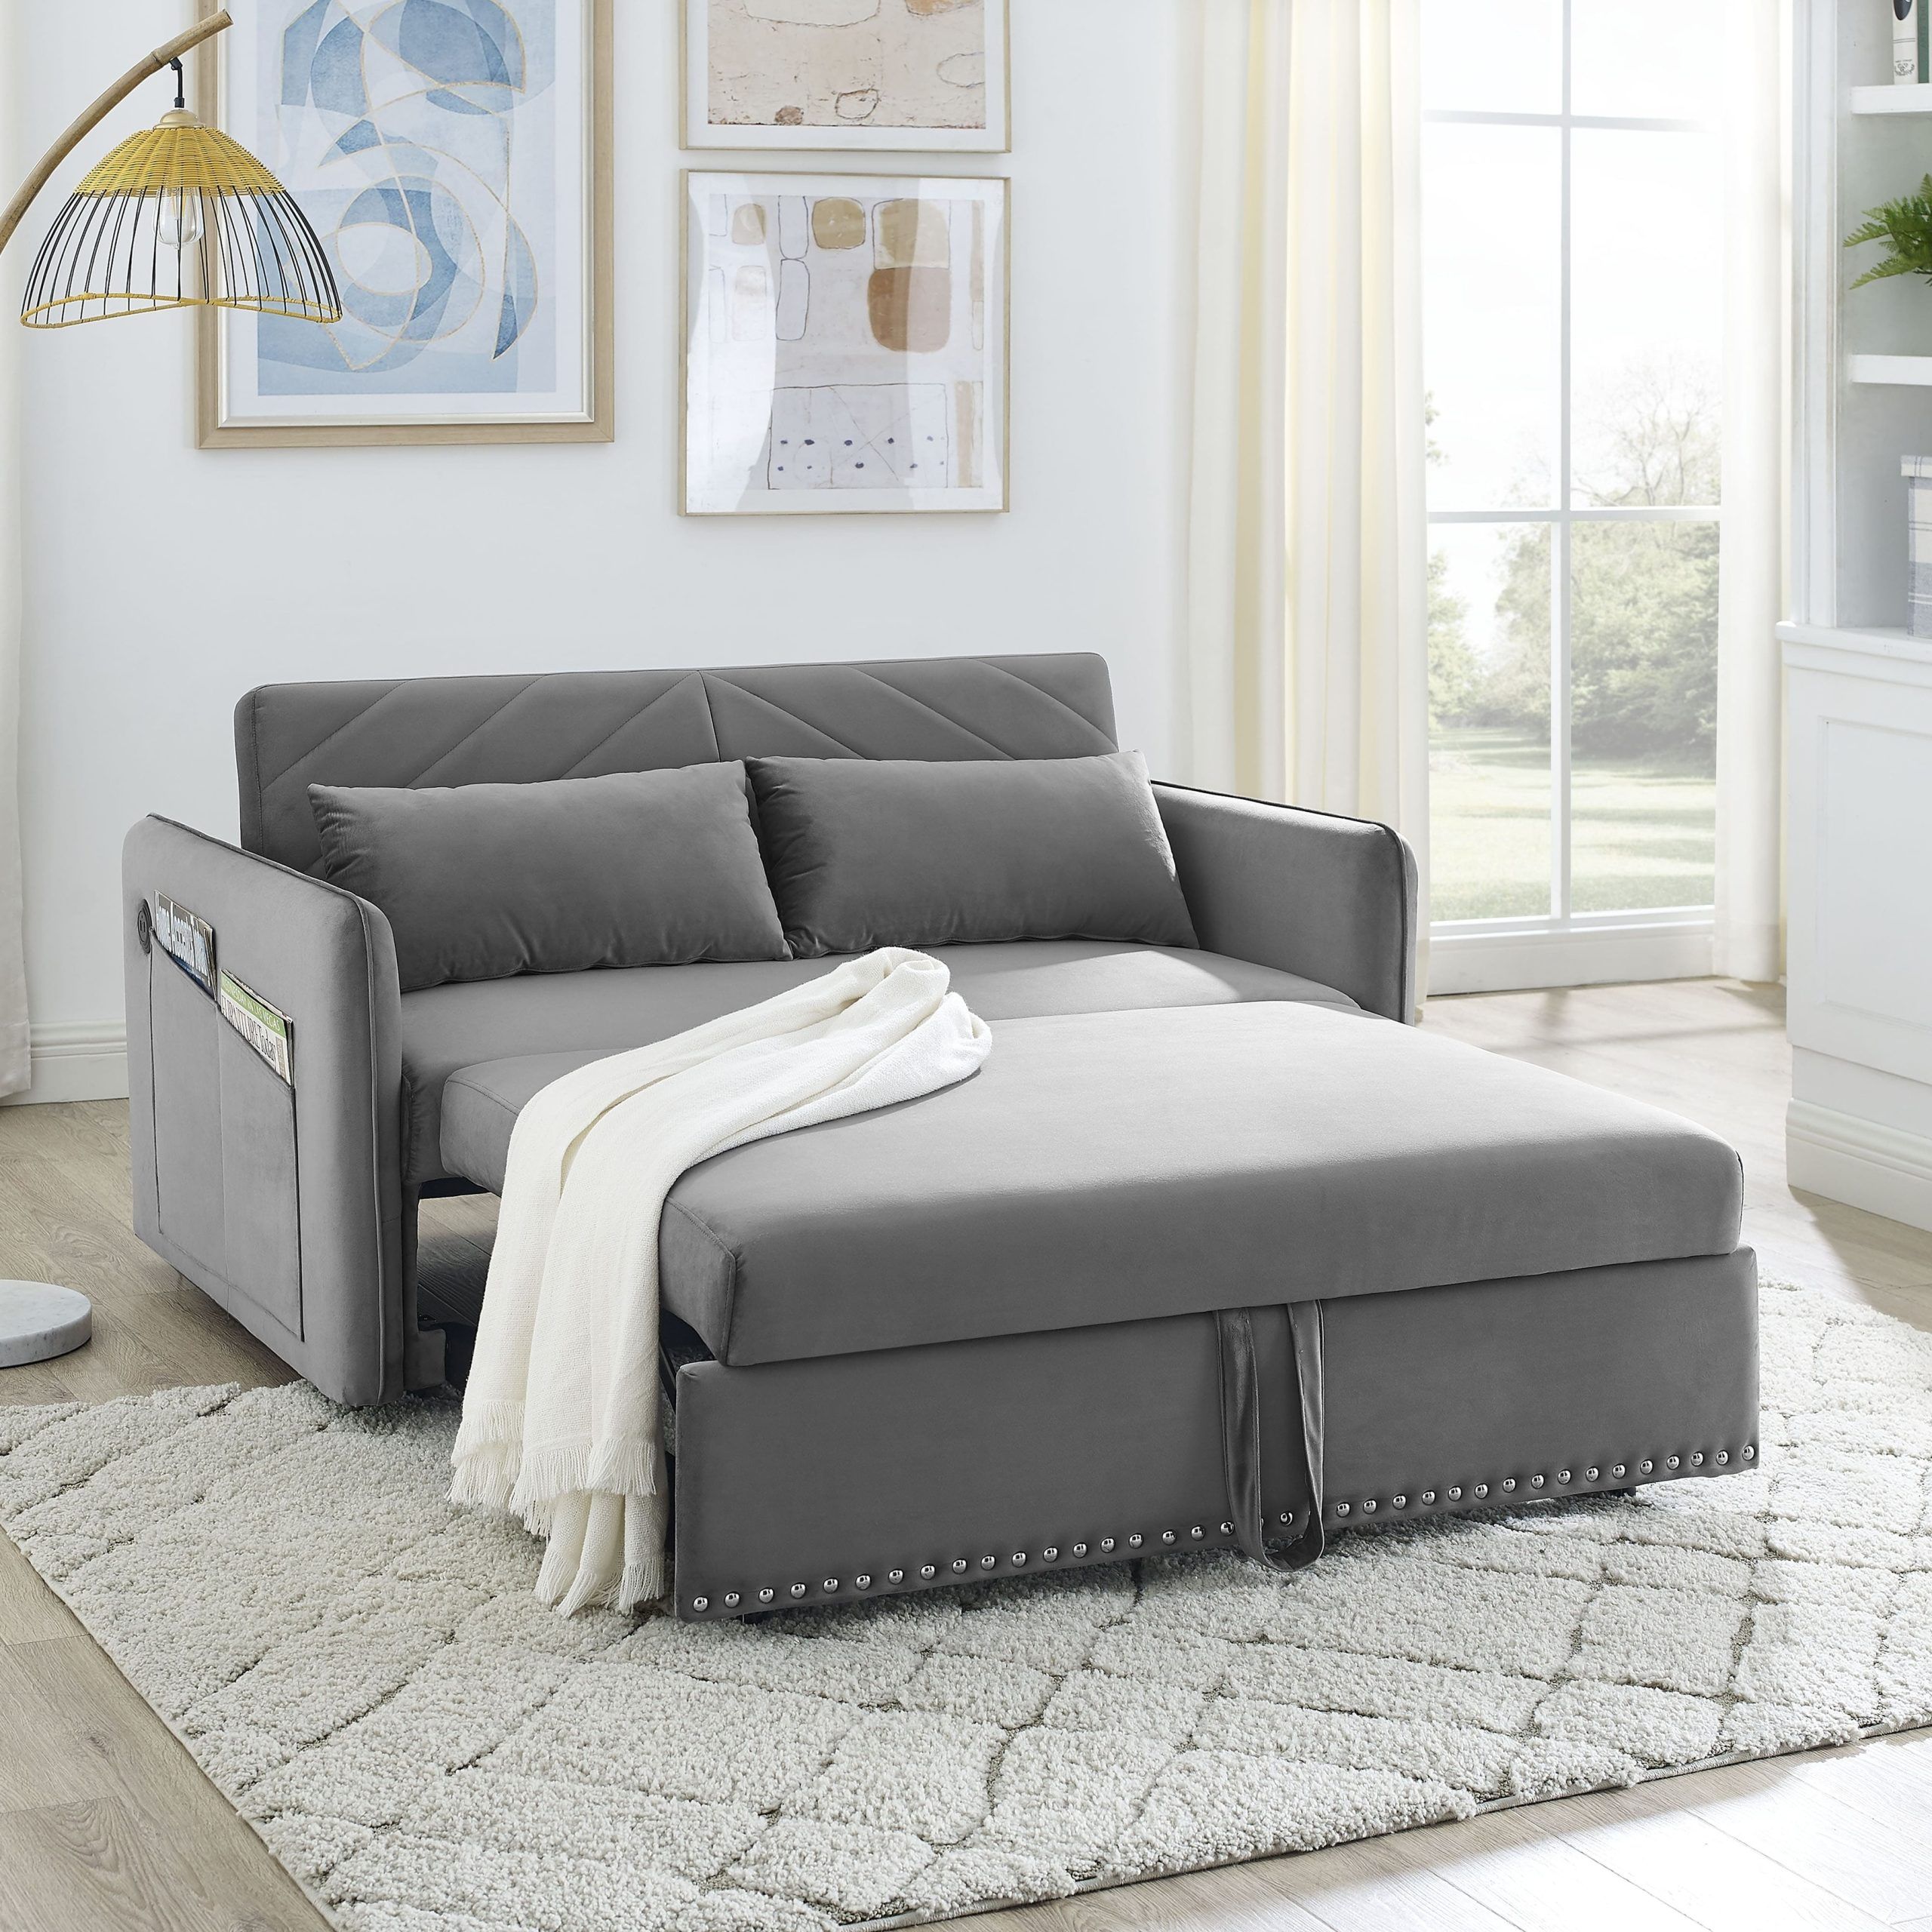 Velvet Pull Out Sleeper Sofa , 3 In 1 Adjustable Sleeper With Pull Out Bed,  2 Lumbar Pillows And Side Pocket – Bed Bath & Beyond – 38084240 Intended For 3 In 1 Gray Pull Out Sleeper Sofas (Photo 4 of 15)